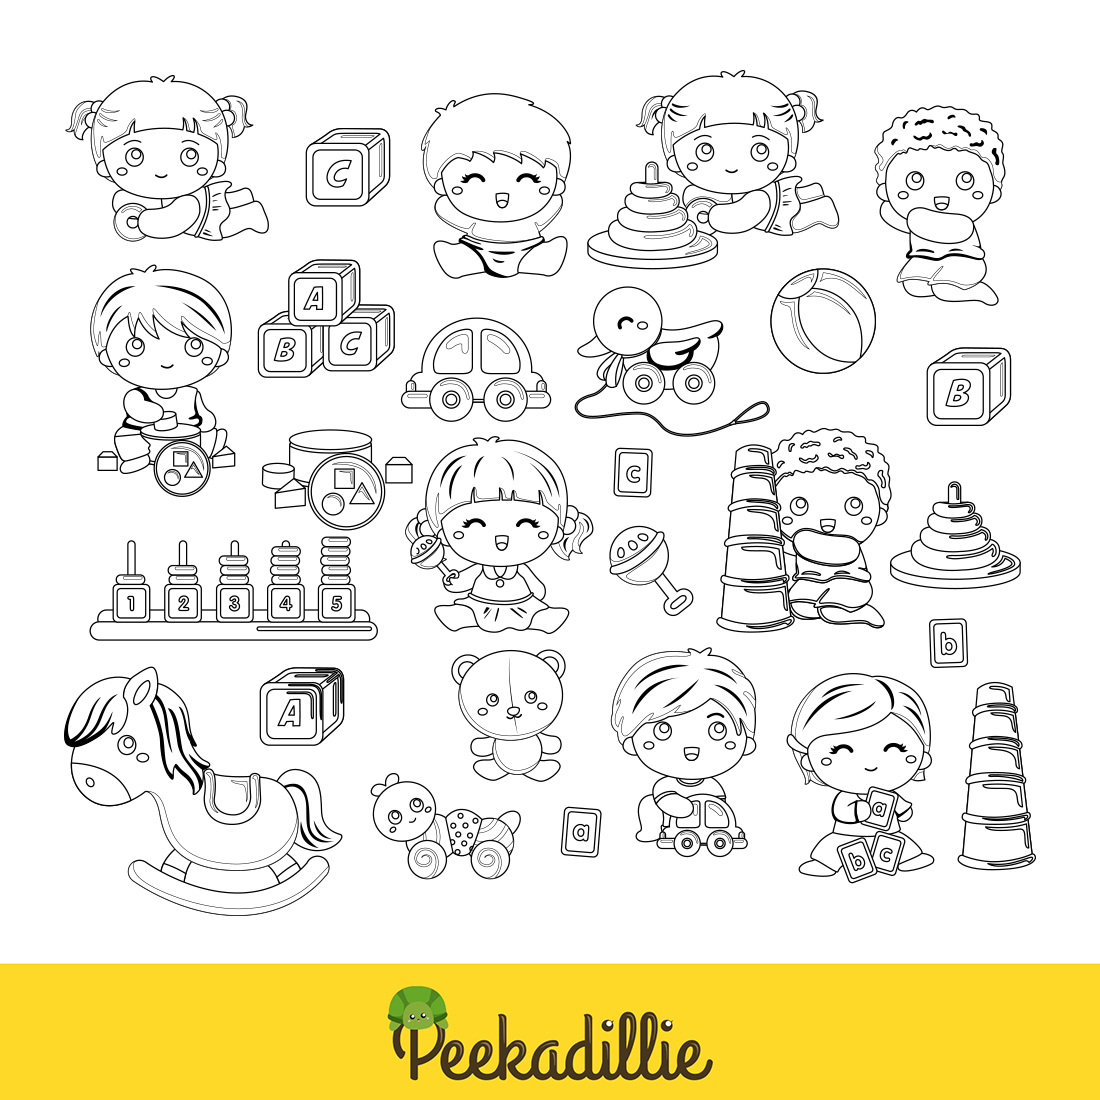 Baby and Their Toys Digital Stamp cover image.